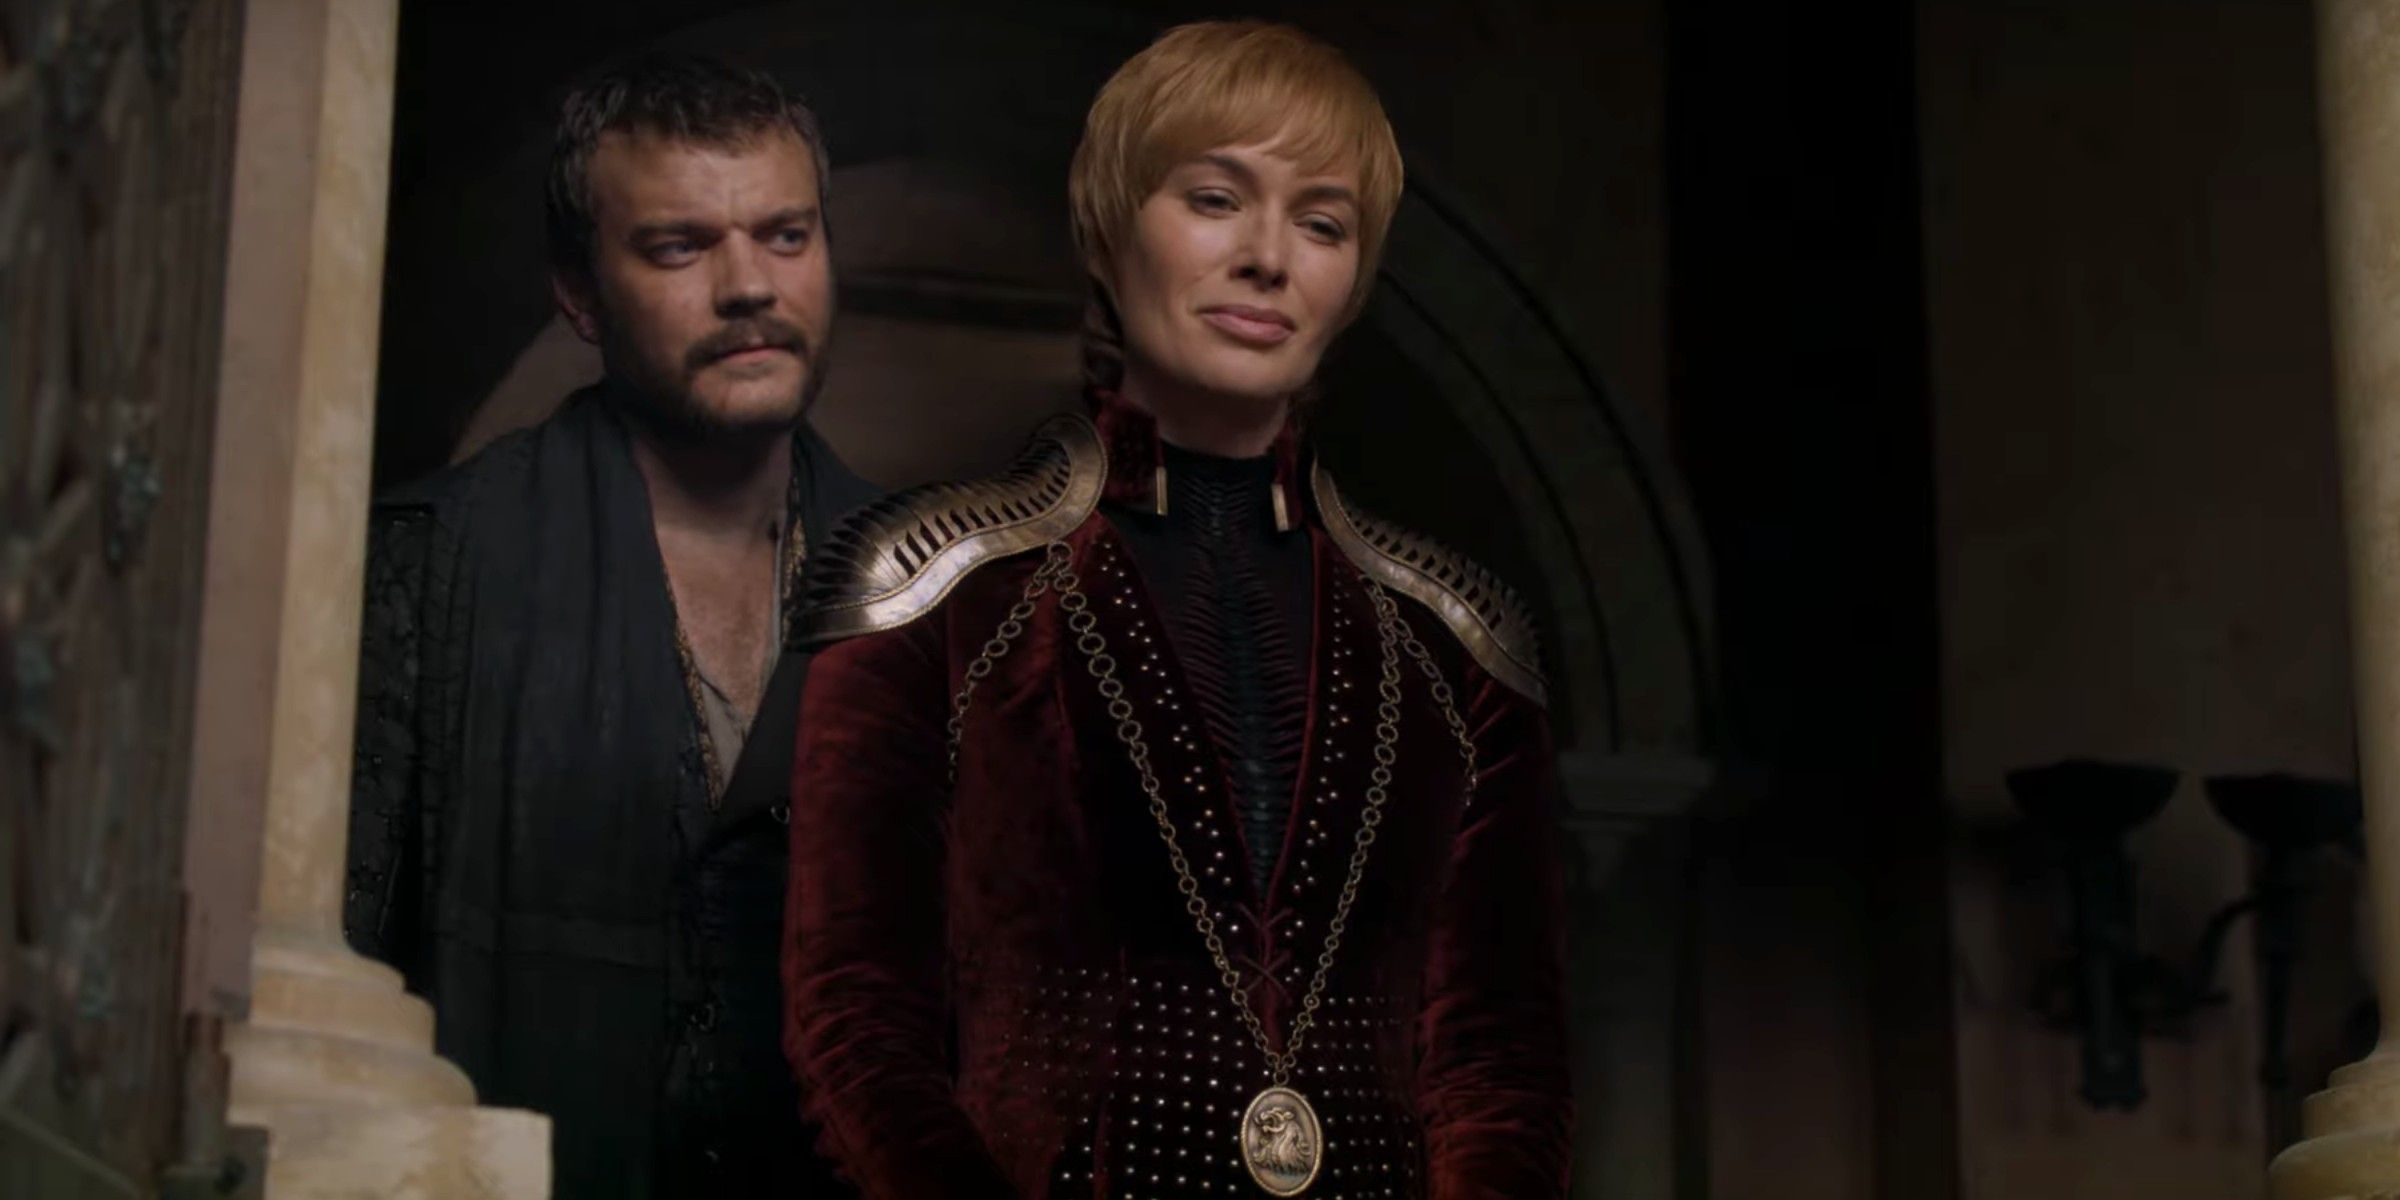 Euron Greyjoy approaches Cersei from behind in bedroom